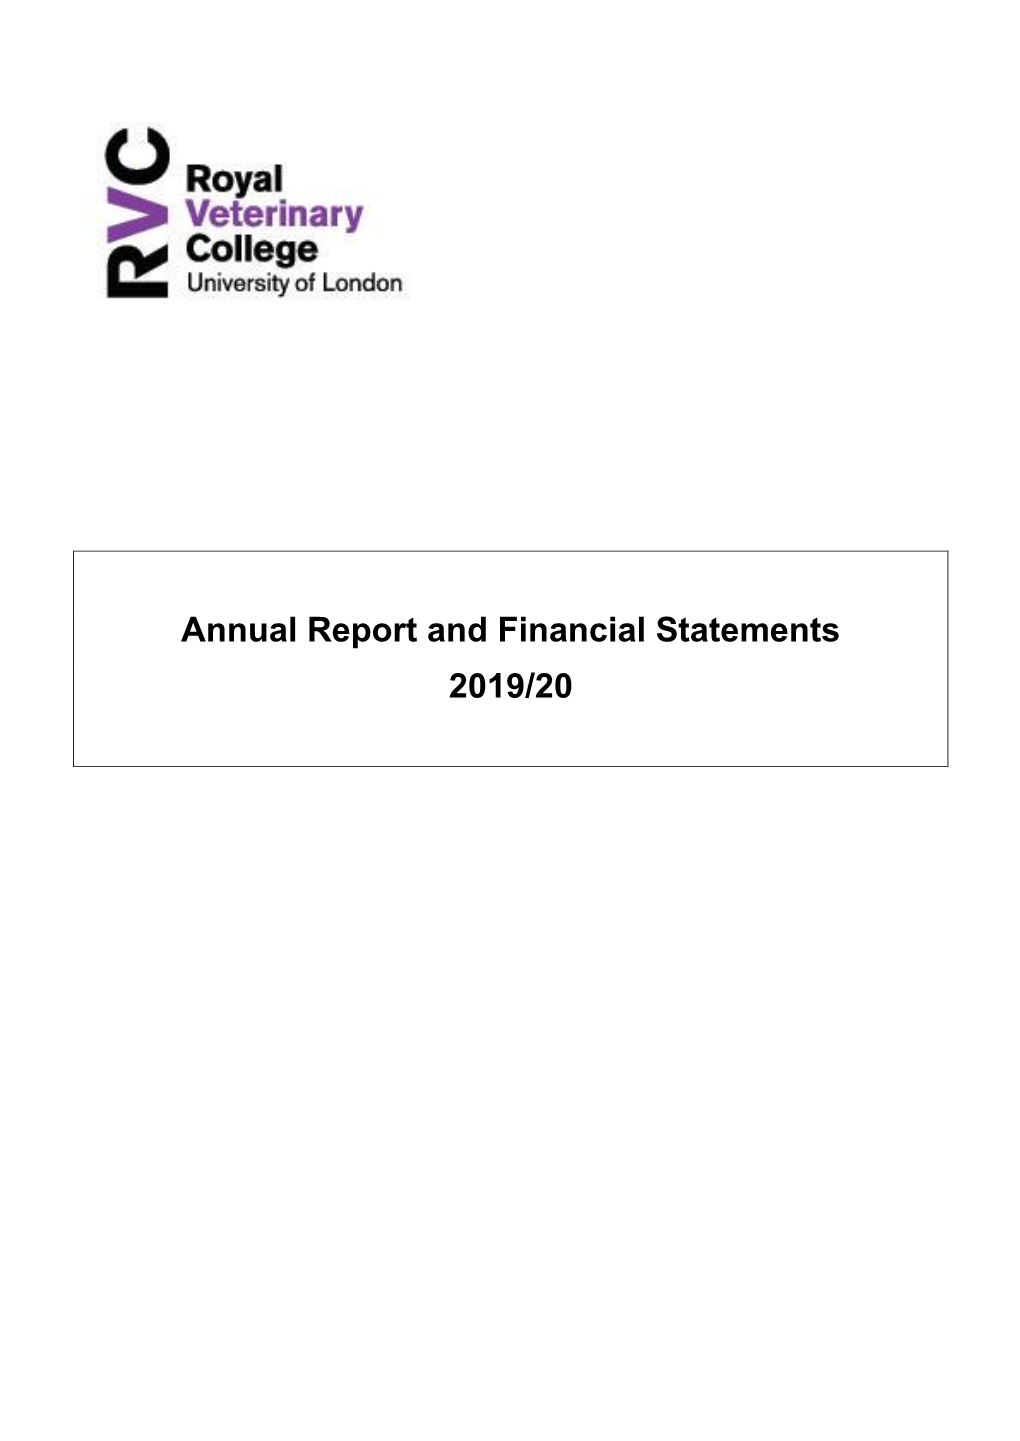 Royal Veterinary College Annual Report and Financial Statements